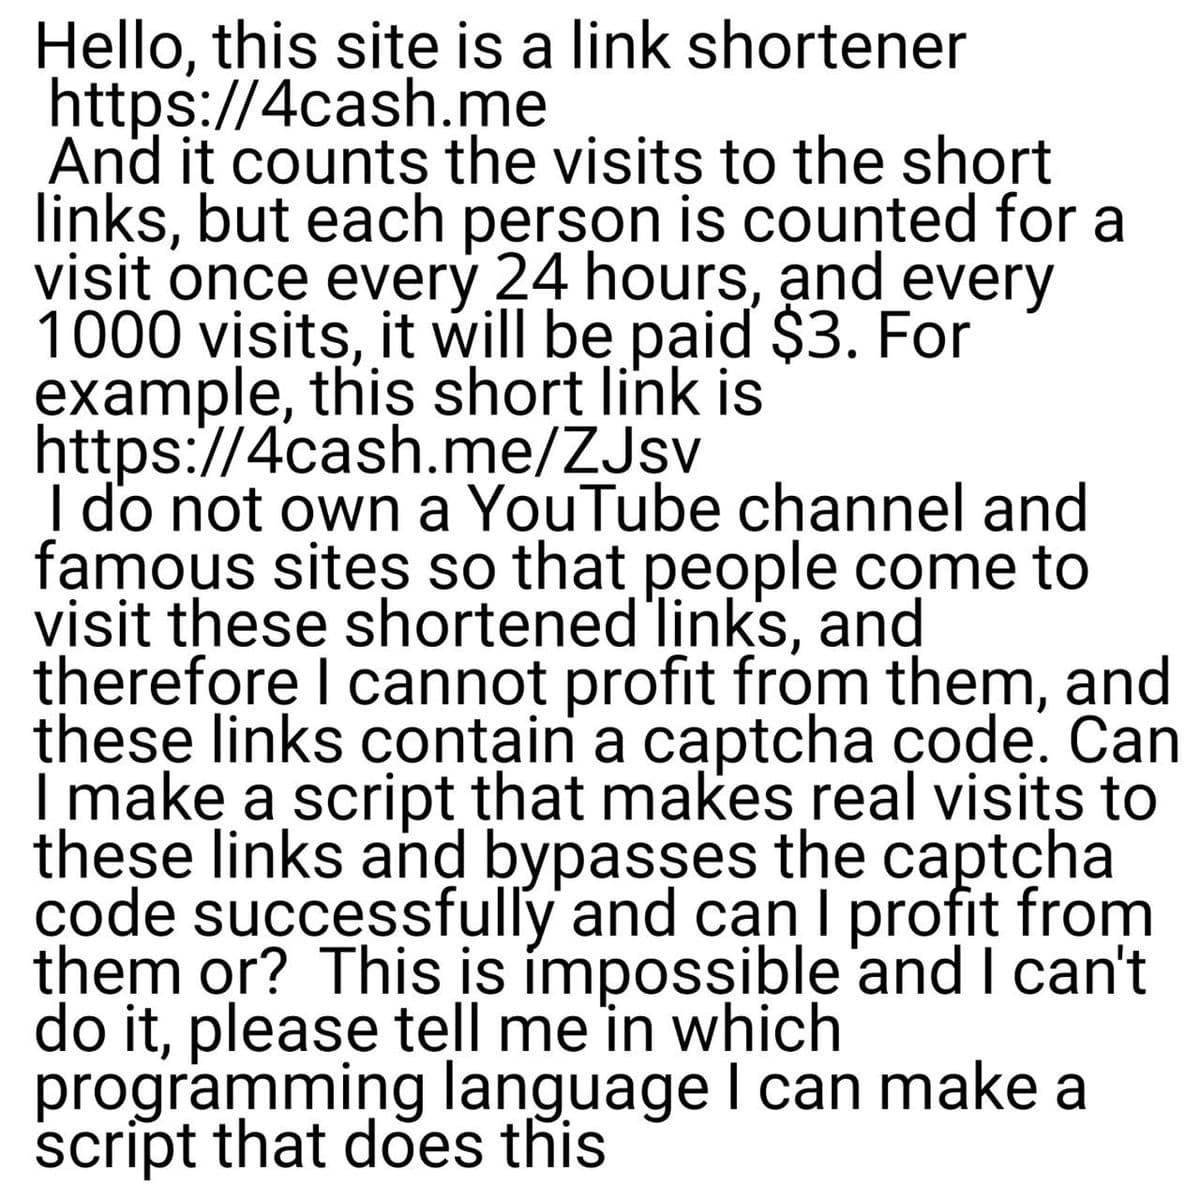 Hello, this site is a link shortener
https://4cash.me
And it counts the visits to the short
links, but each person is counted for a
visit once every 24 hours, and every
1000 visits, it will be paid $3. For
example, this short link is
https://4cash.me/ZJsv
I do not own a YouTube channel and
famous sites so that people come to
visit these shortened'links, and
therefore I cannot profit from them, and
these links contain a captcha çode. Can
I make a script that makes real visits to
these links and bypasses the captcha
code successfully and can I profit from
them or? This is ímpossible 'and I can't
do it, please tell me in which
programming language I can make a
script that does this
|
